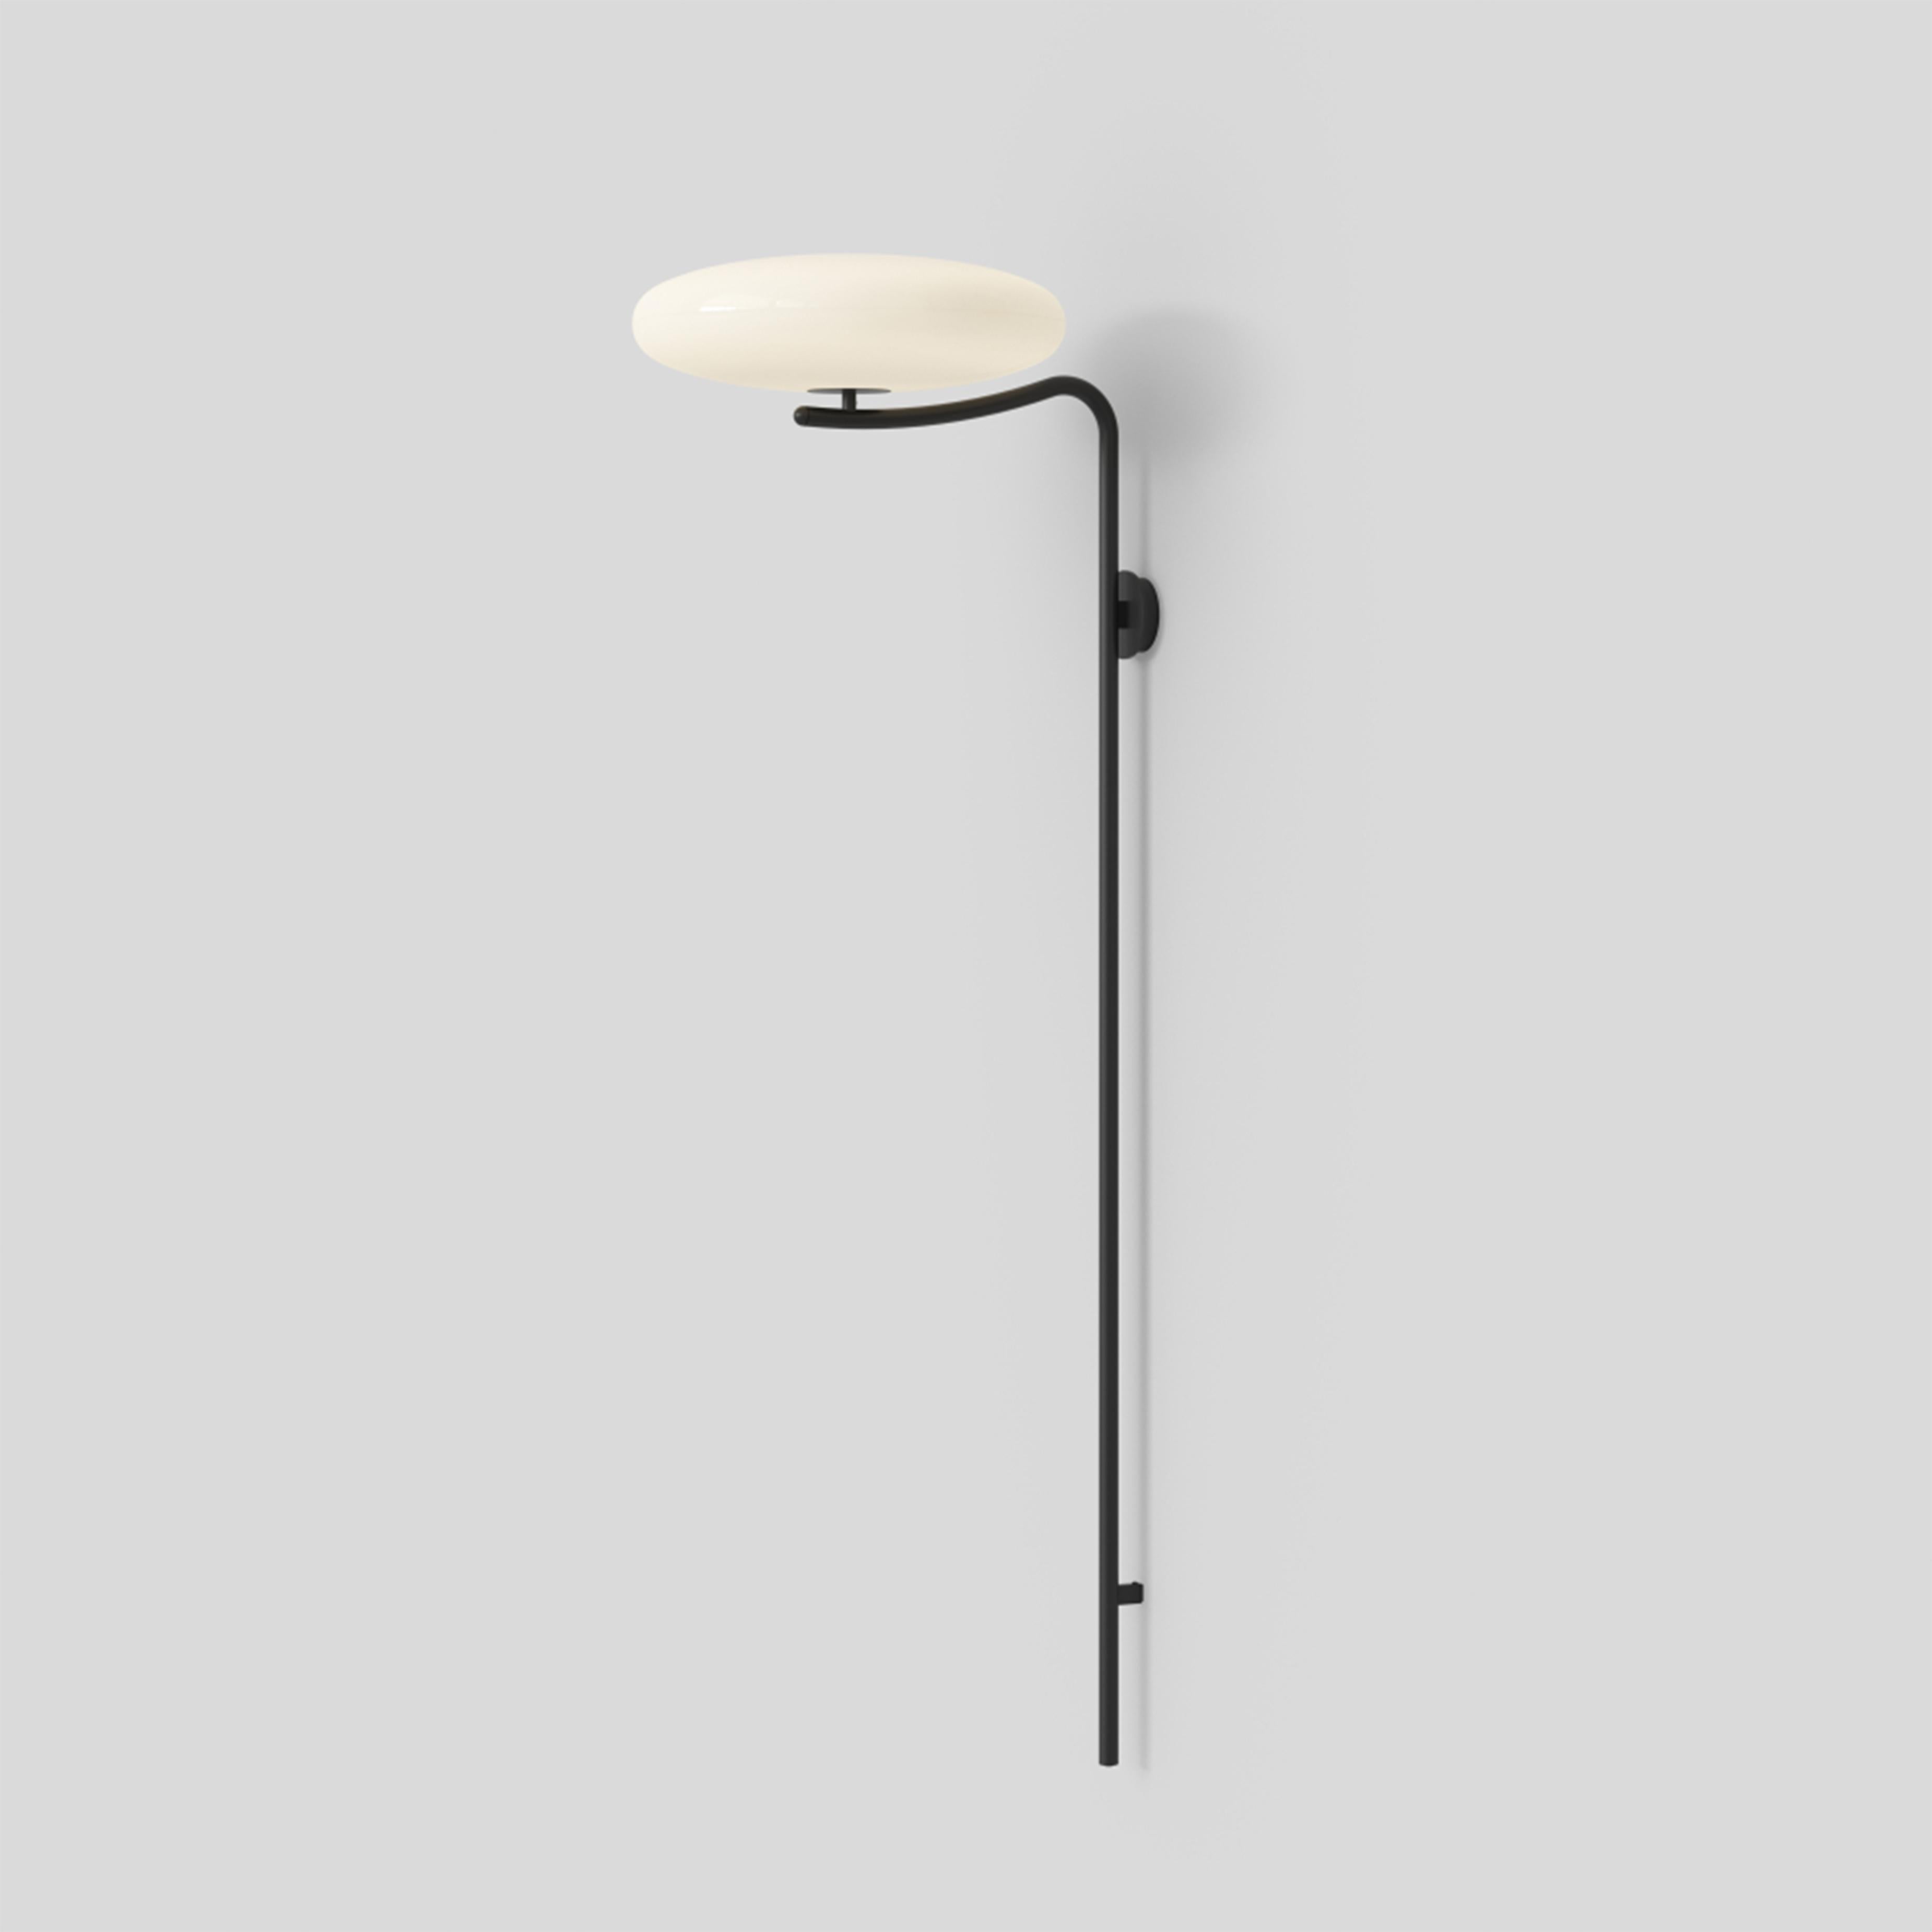 Gino Sarfatti wall lamp Model 2065 wall.
White diffuser, black structure.
Manufactured by Astep

Model 2065
Design by Gino Sarfatti
The 2065 is made of two joined opaline methacrylate saucer-shaped diffusers suspended from the ceiling with a black